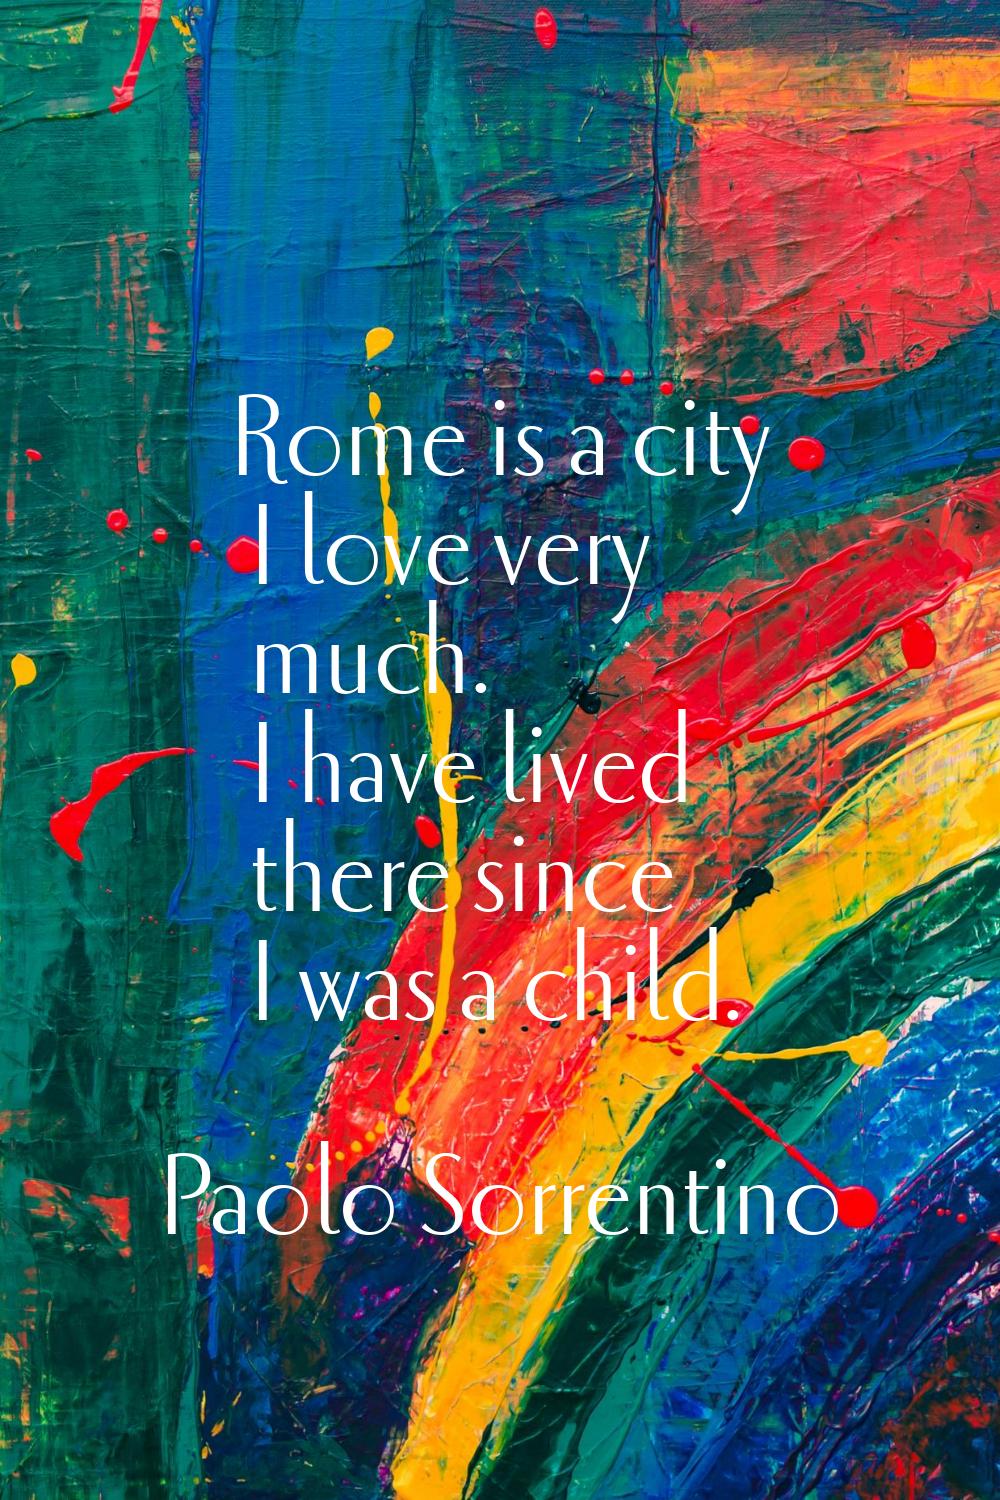 Rome is a city I love very much. I have lived there since I was a child.